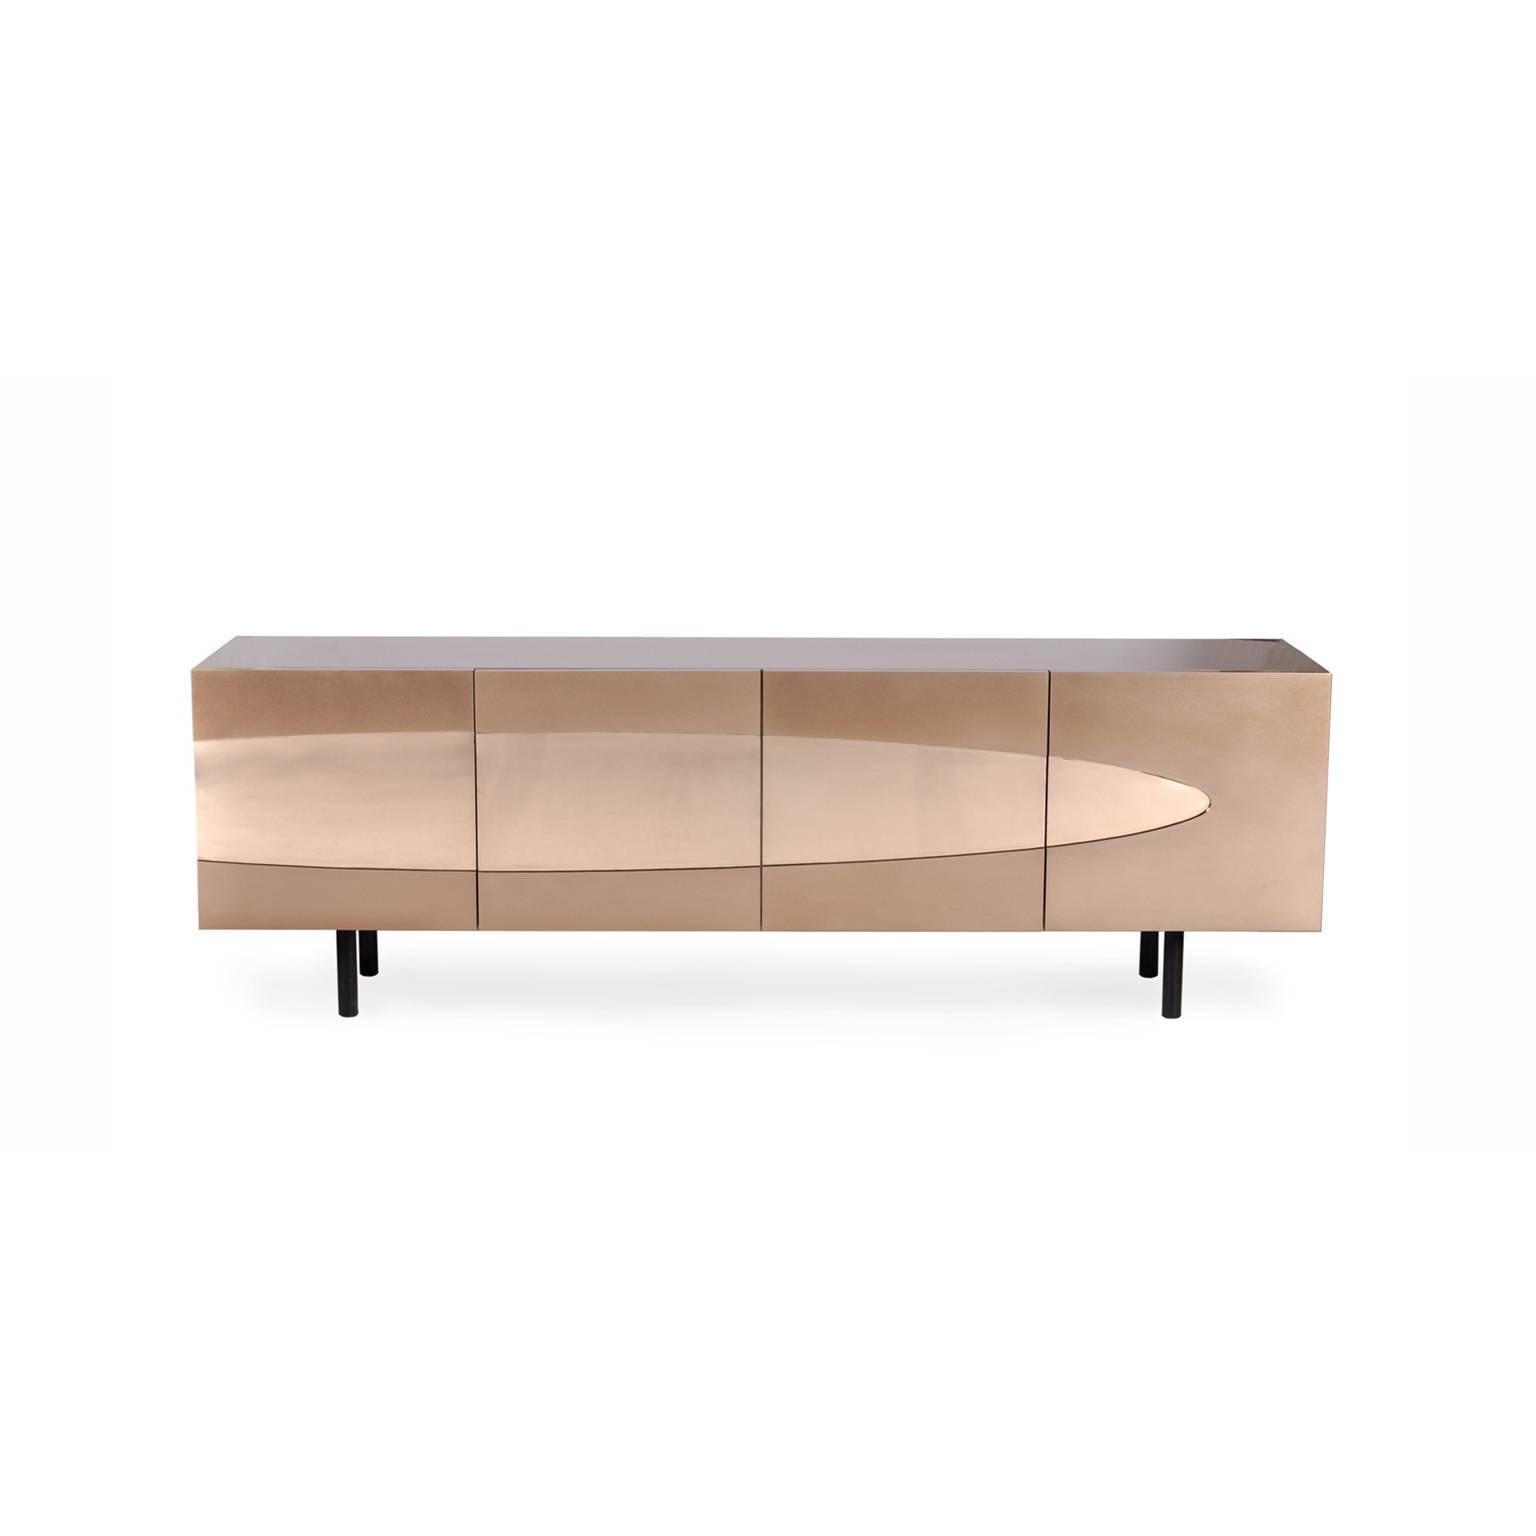 The Ellipse sideboard in bronze is an artistic luxurious piece built to satisfy bronze lovers. This four door, two-drawer contemporary cabinet is entirely clad in bronze, with a sleek Venetian red lacquered interior and genuine ebony legs.

This